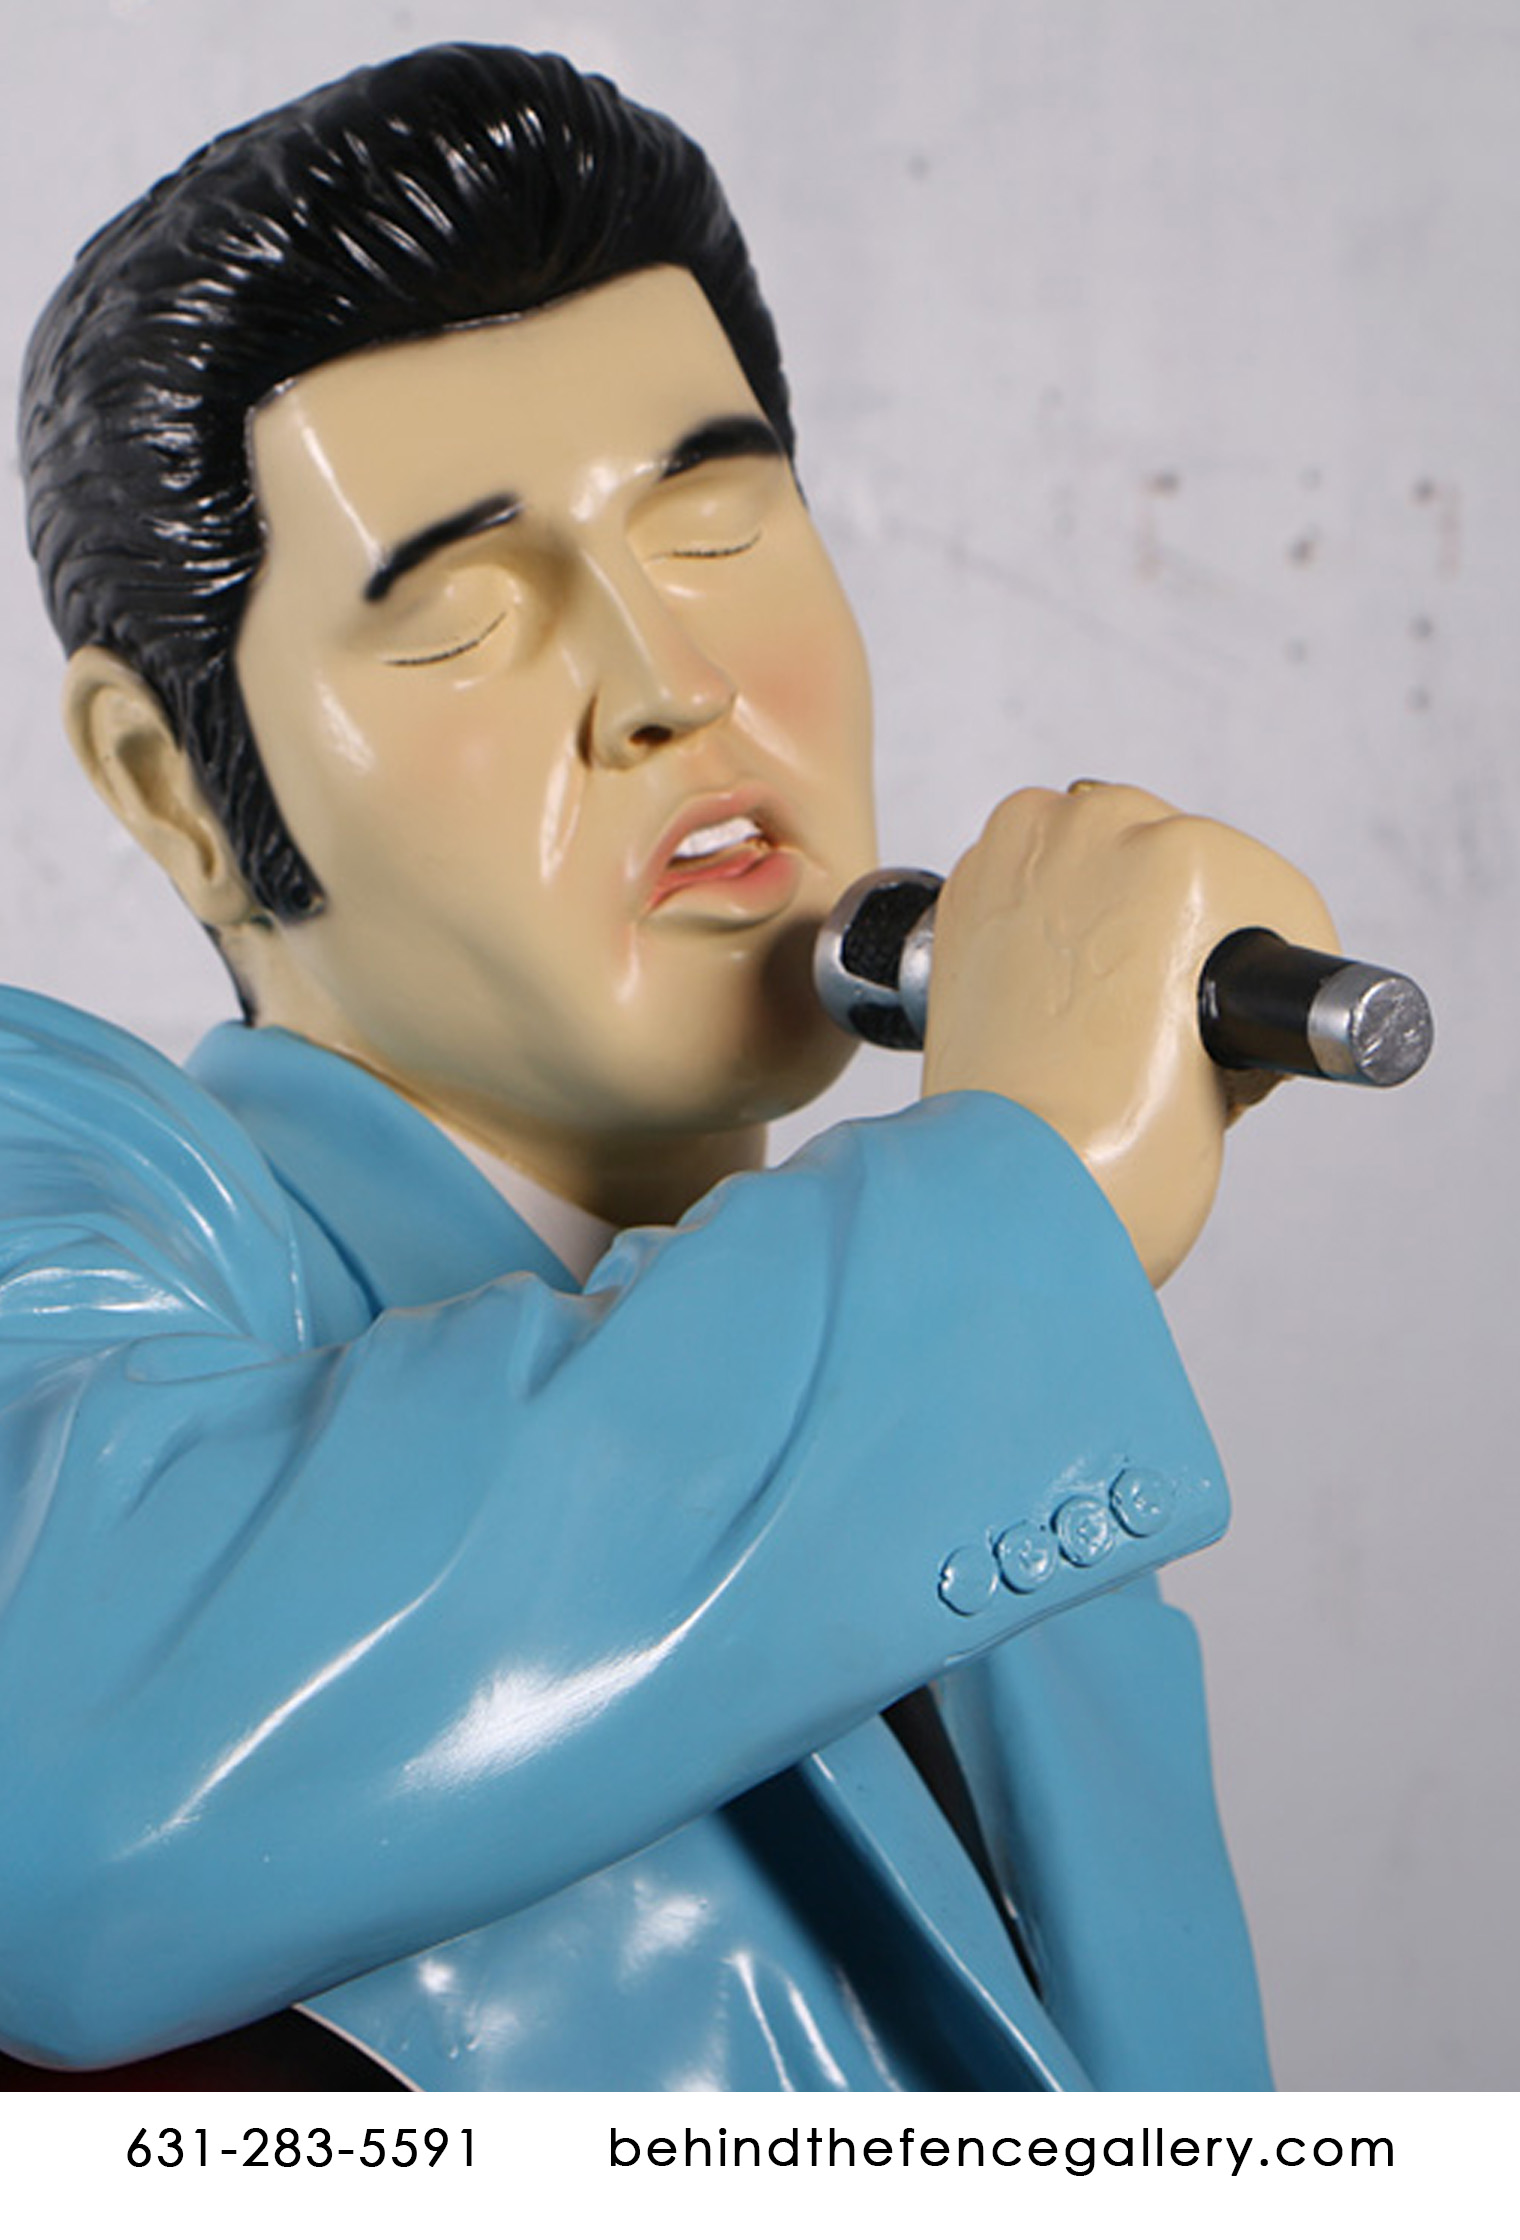 Elvis Singing With Guitar Statue - Click Image to Close